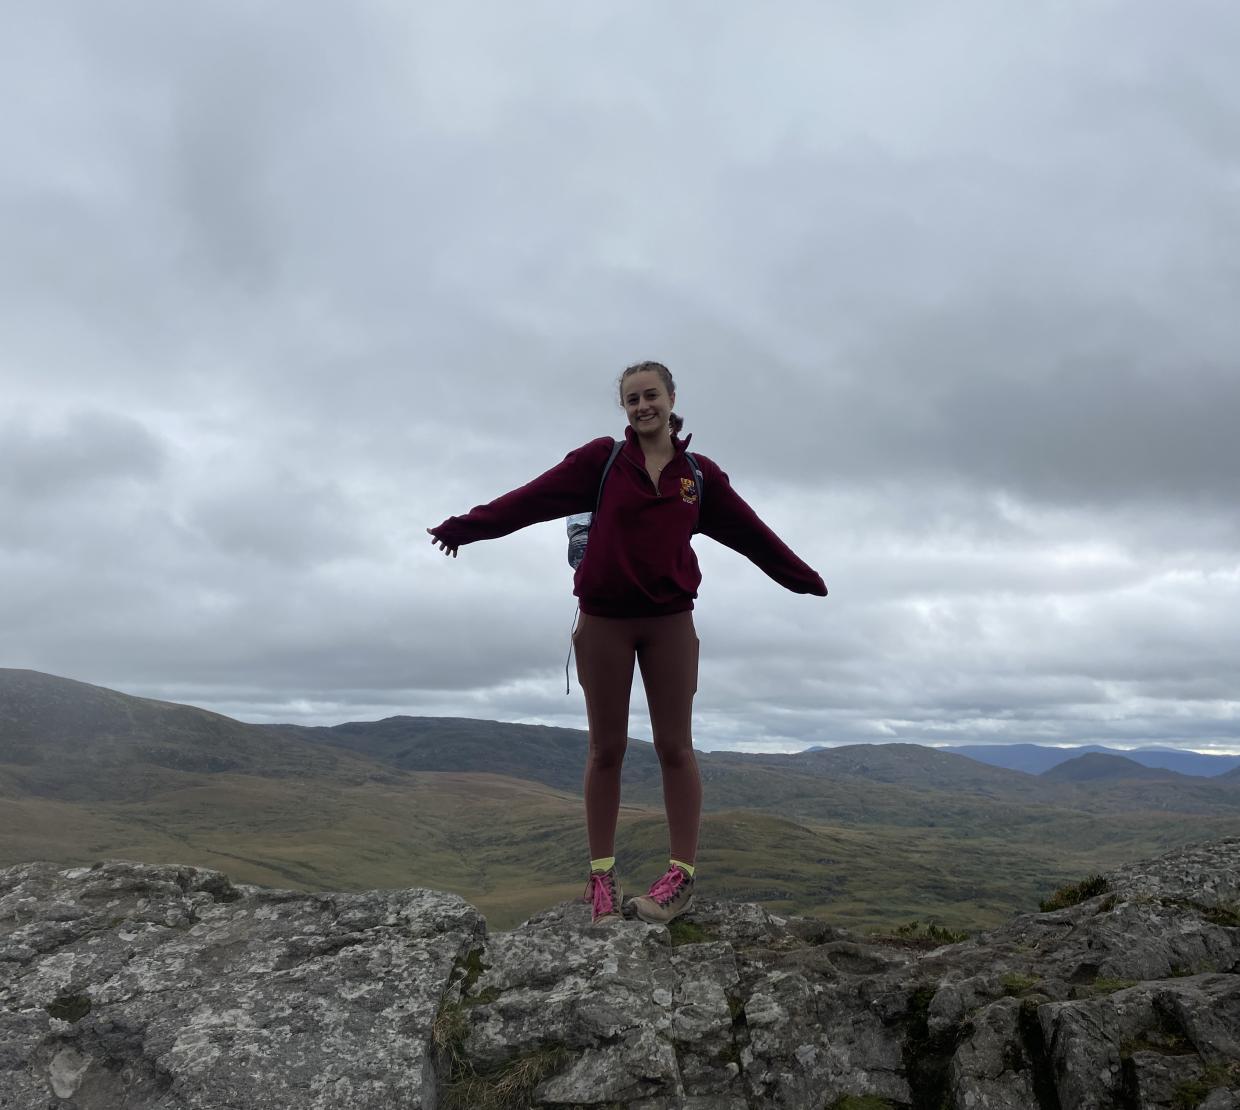 Amelia Noall standing at the top of Torc Mountain in Ireland, overlooking a vast field.